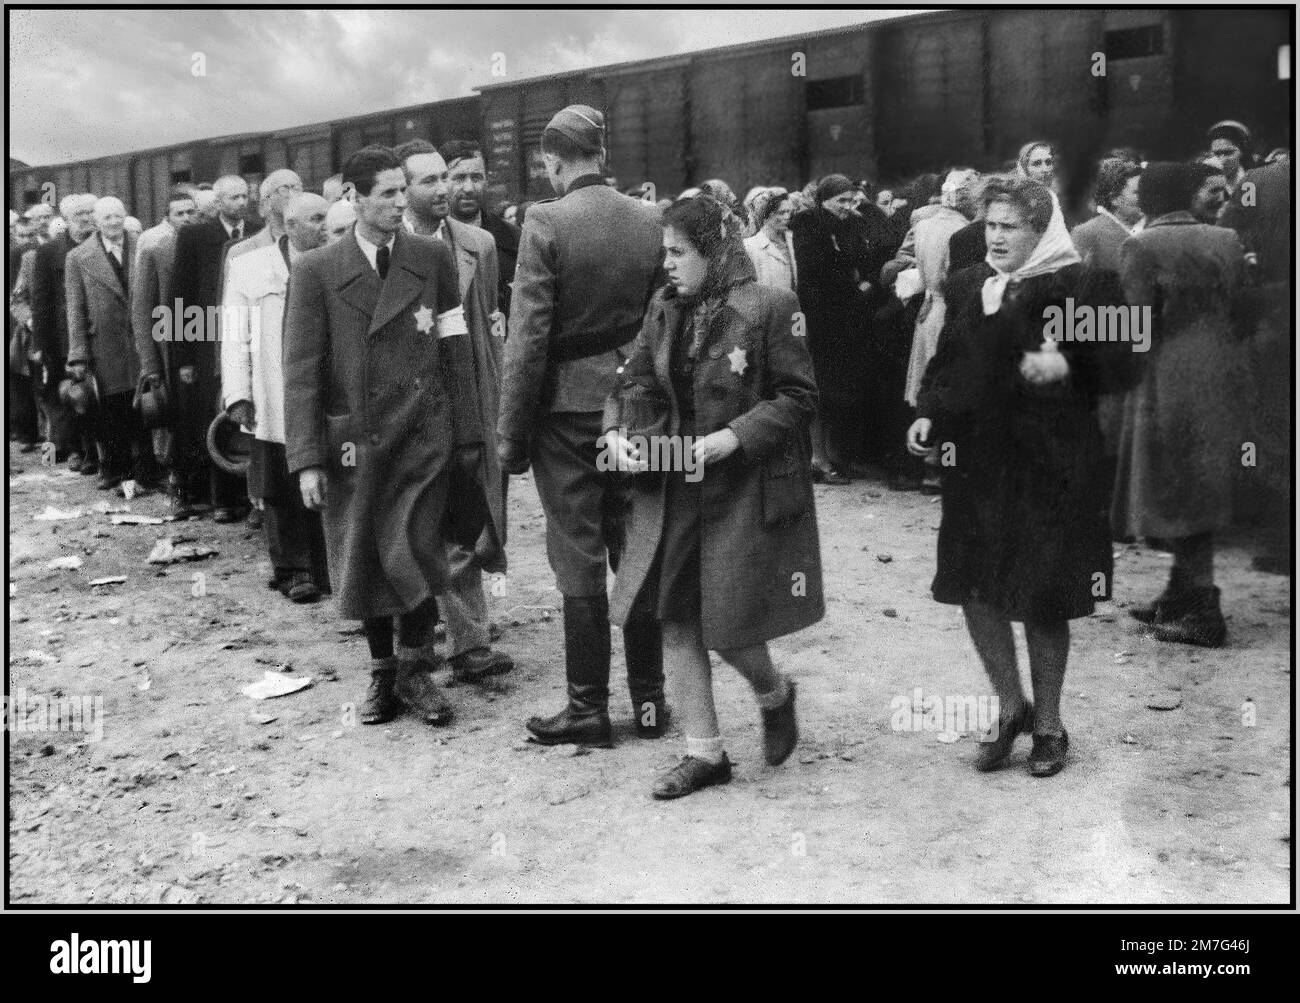 AUSCHWITZ-BIRKENAU HOLOCAUST PRISONERS ARRIVAL WEARING YELLOW STARS OF DAVID - A vision of hell on earth. 1944, Nazis 'grading' (life or death) unsuspecting prisoners on rail concourse outside entrance to Auschwitz-Birkenau extermination death camp. The infamous Auschwitz camp was started by order of Adolf Hitler in 1940's during the occupation of Poland by Nazi Germany during World War 2, further enabled by Heinrich Luitpold Himmler the Reichsführer of the Schutzstaffel, and leading member of the Nazi Party of Germany Stock Photo